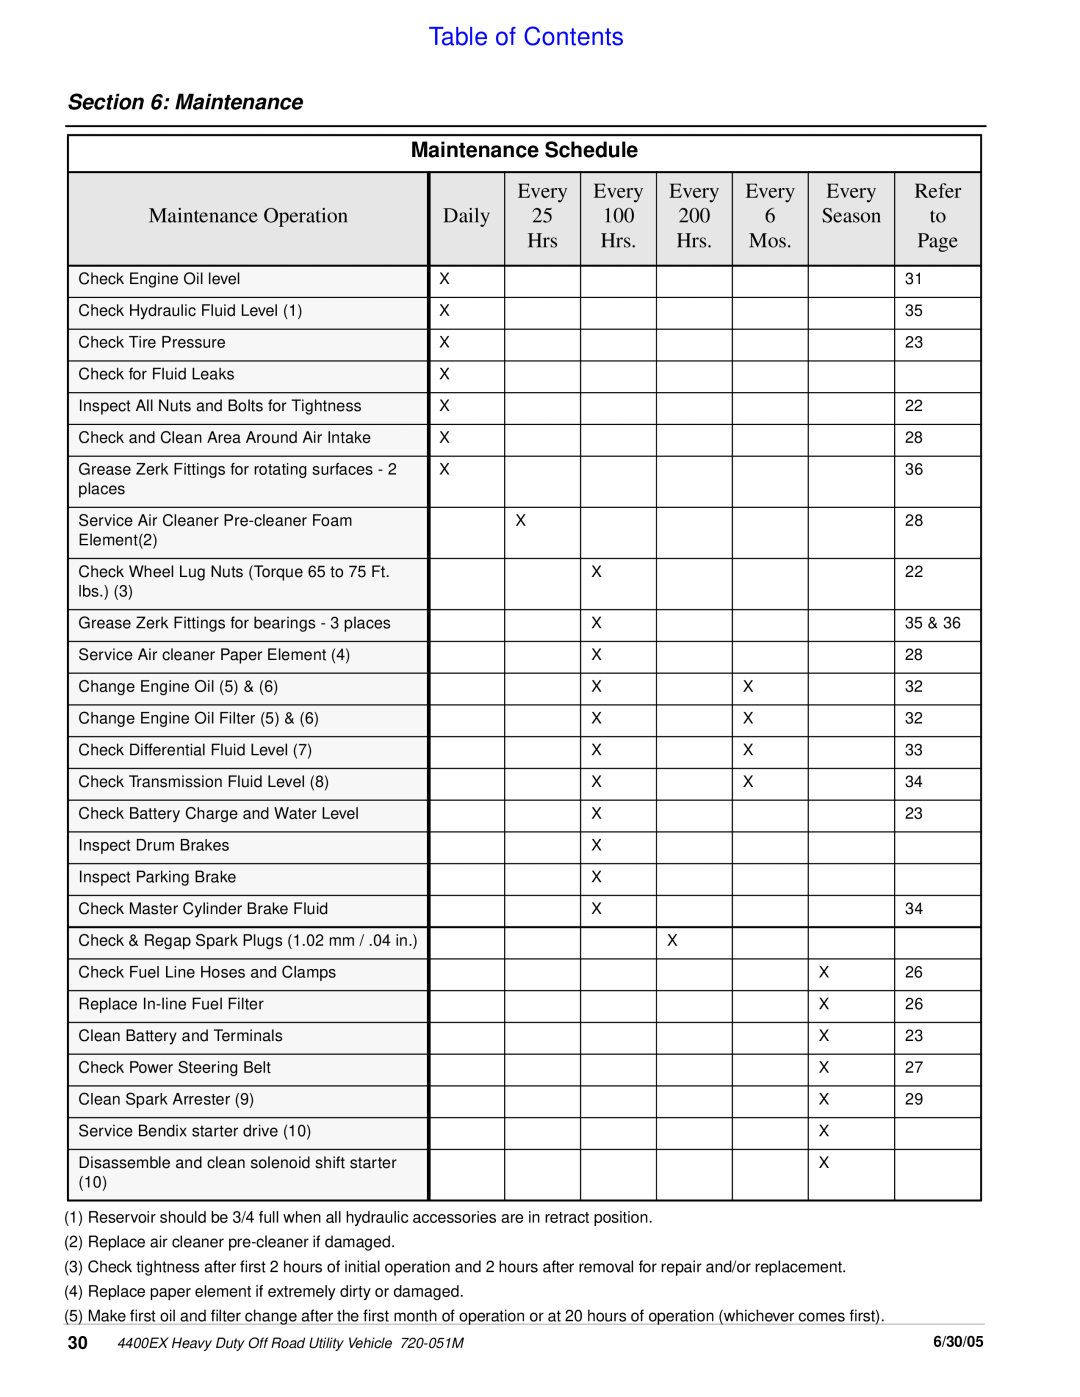 Land Pride 4400ex manual Maintenance Schedule, Table of Contents 